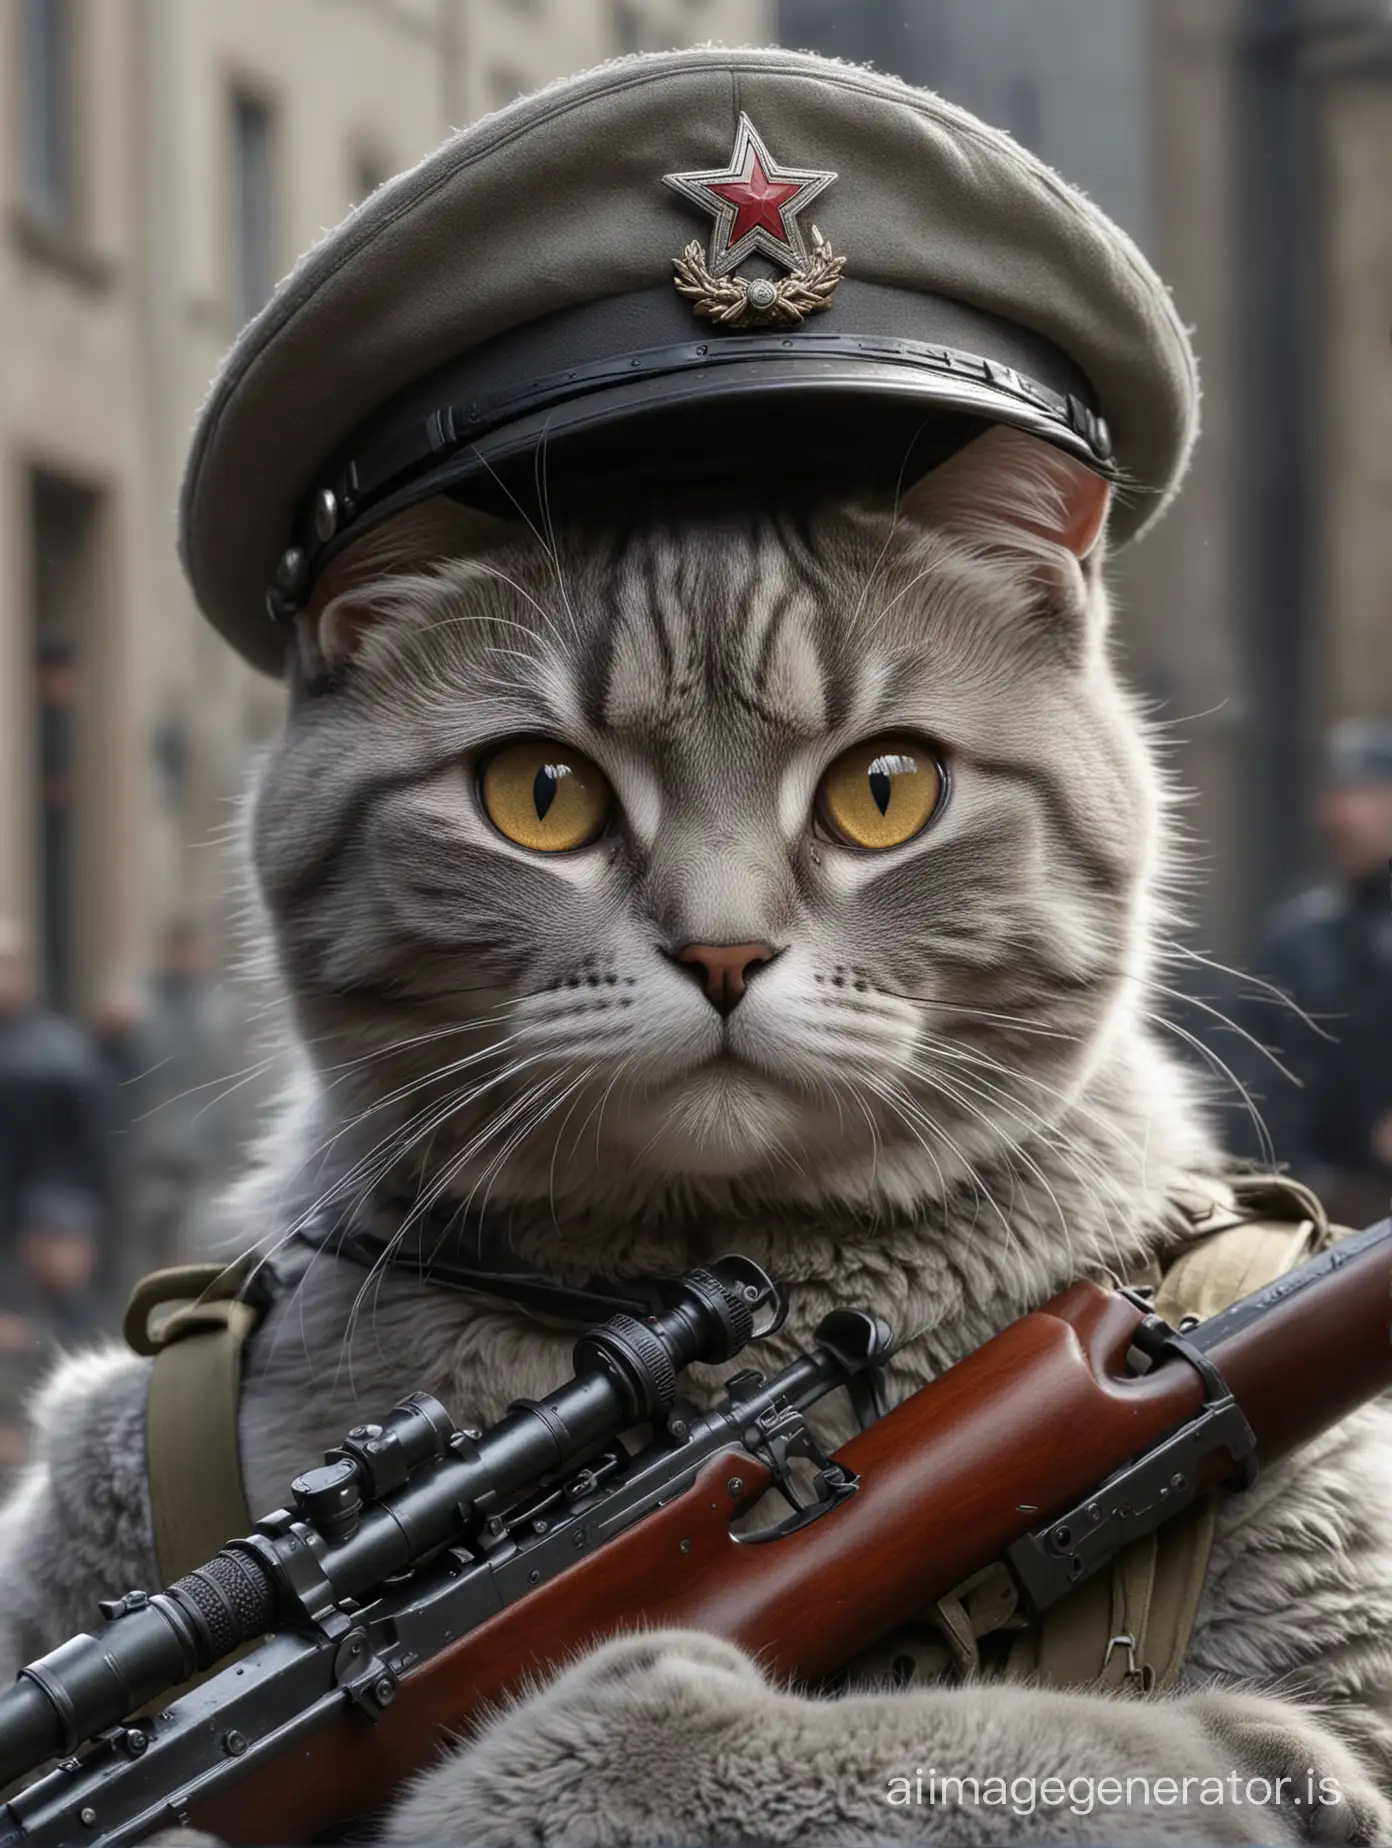 Realistic-4K-HD-Image-of-Soviet-Officer-Cat-with-Mosin-Rifle-in-1944-Berlin